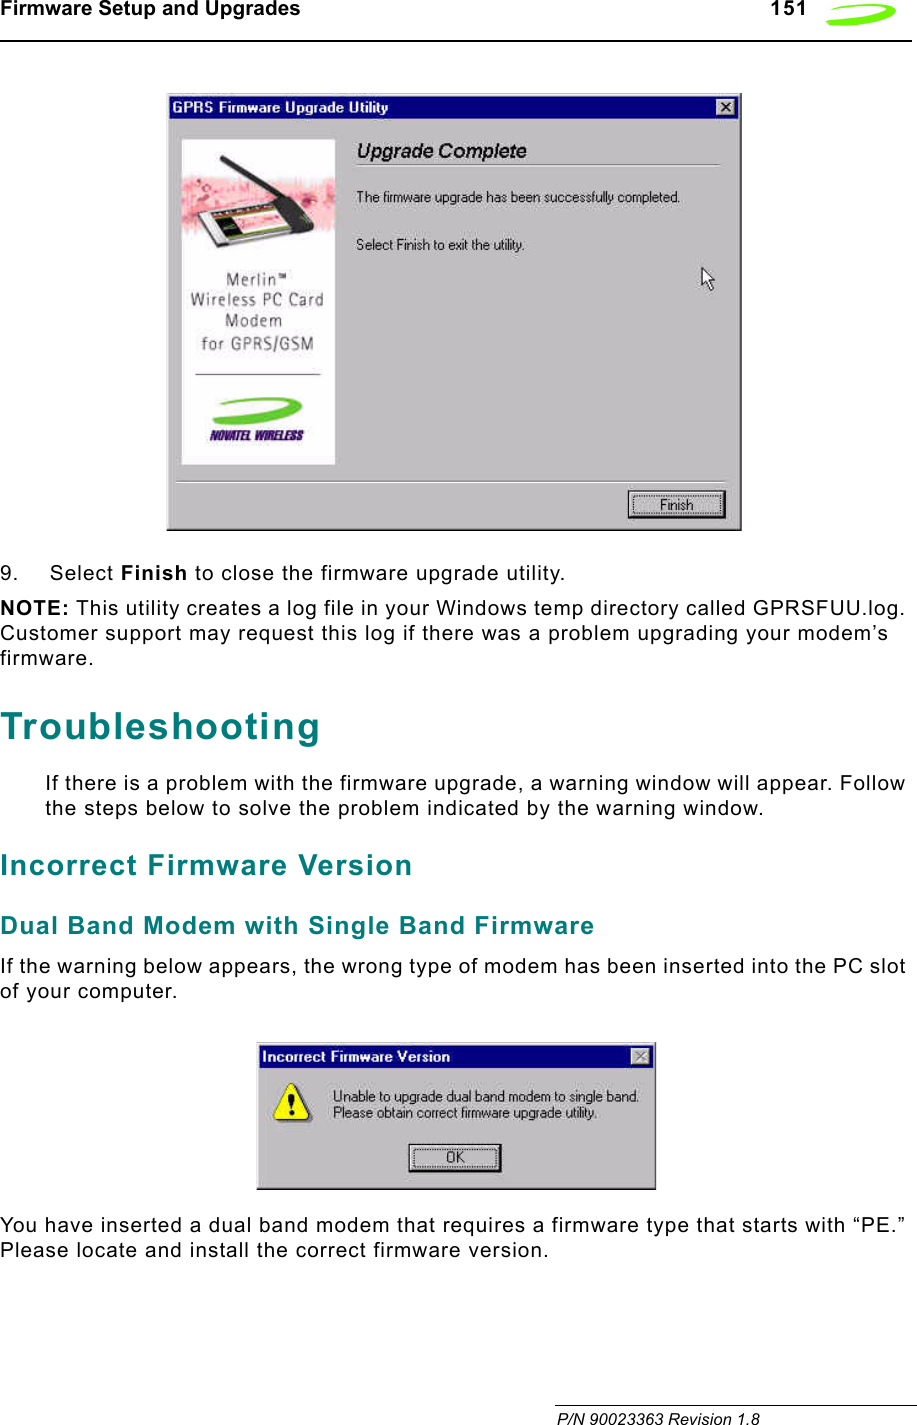 Firmware Setup and Upgrades   151 P/N 90023363 Revision 1.8 9. Select Finish to close the firmware upgrade utility.NOTE: This utility creates a log file in your Windows temp directory called GPRSFUU.log. Customer support may request this log if there was a problem upgrading your modem’s firmware.TroubleshootingIf there is a problem with the firmware upgrade, a warning window will appear. Follow the steps below to solve the problem indicated by the warning window.Incorrect Firmware VersionDual Band Modem with Single Band FirmwareIf the warning below appears, the wrong type of modem has been inserted into the PC slot of your computer. You have inserted a dual band modem that requires a firmware type that starts with “PE.” Please locate and install the correct firmware version.